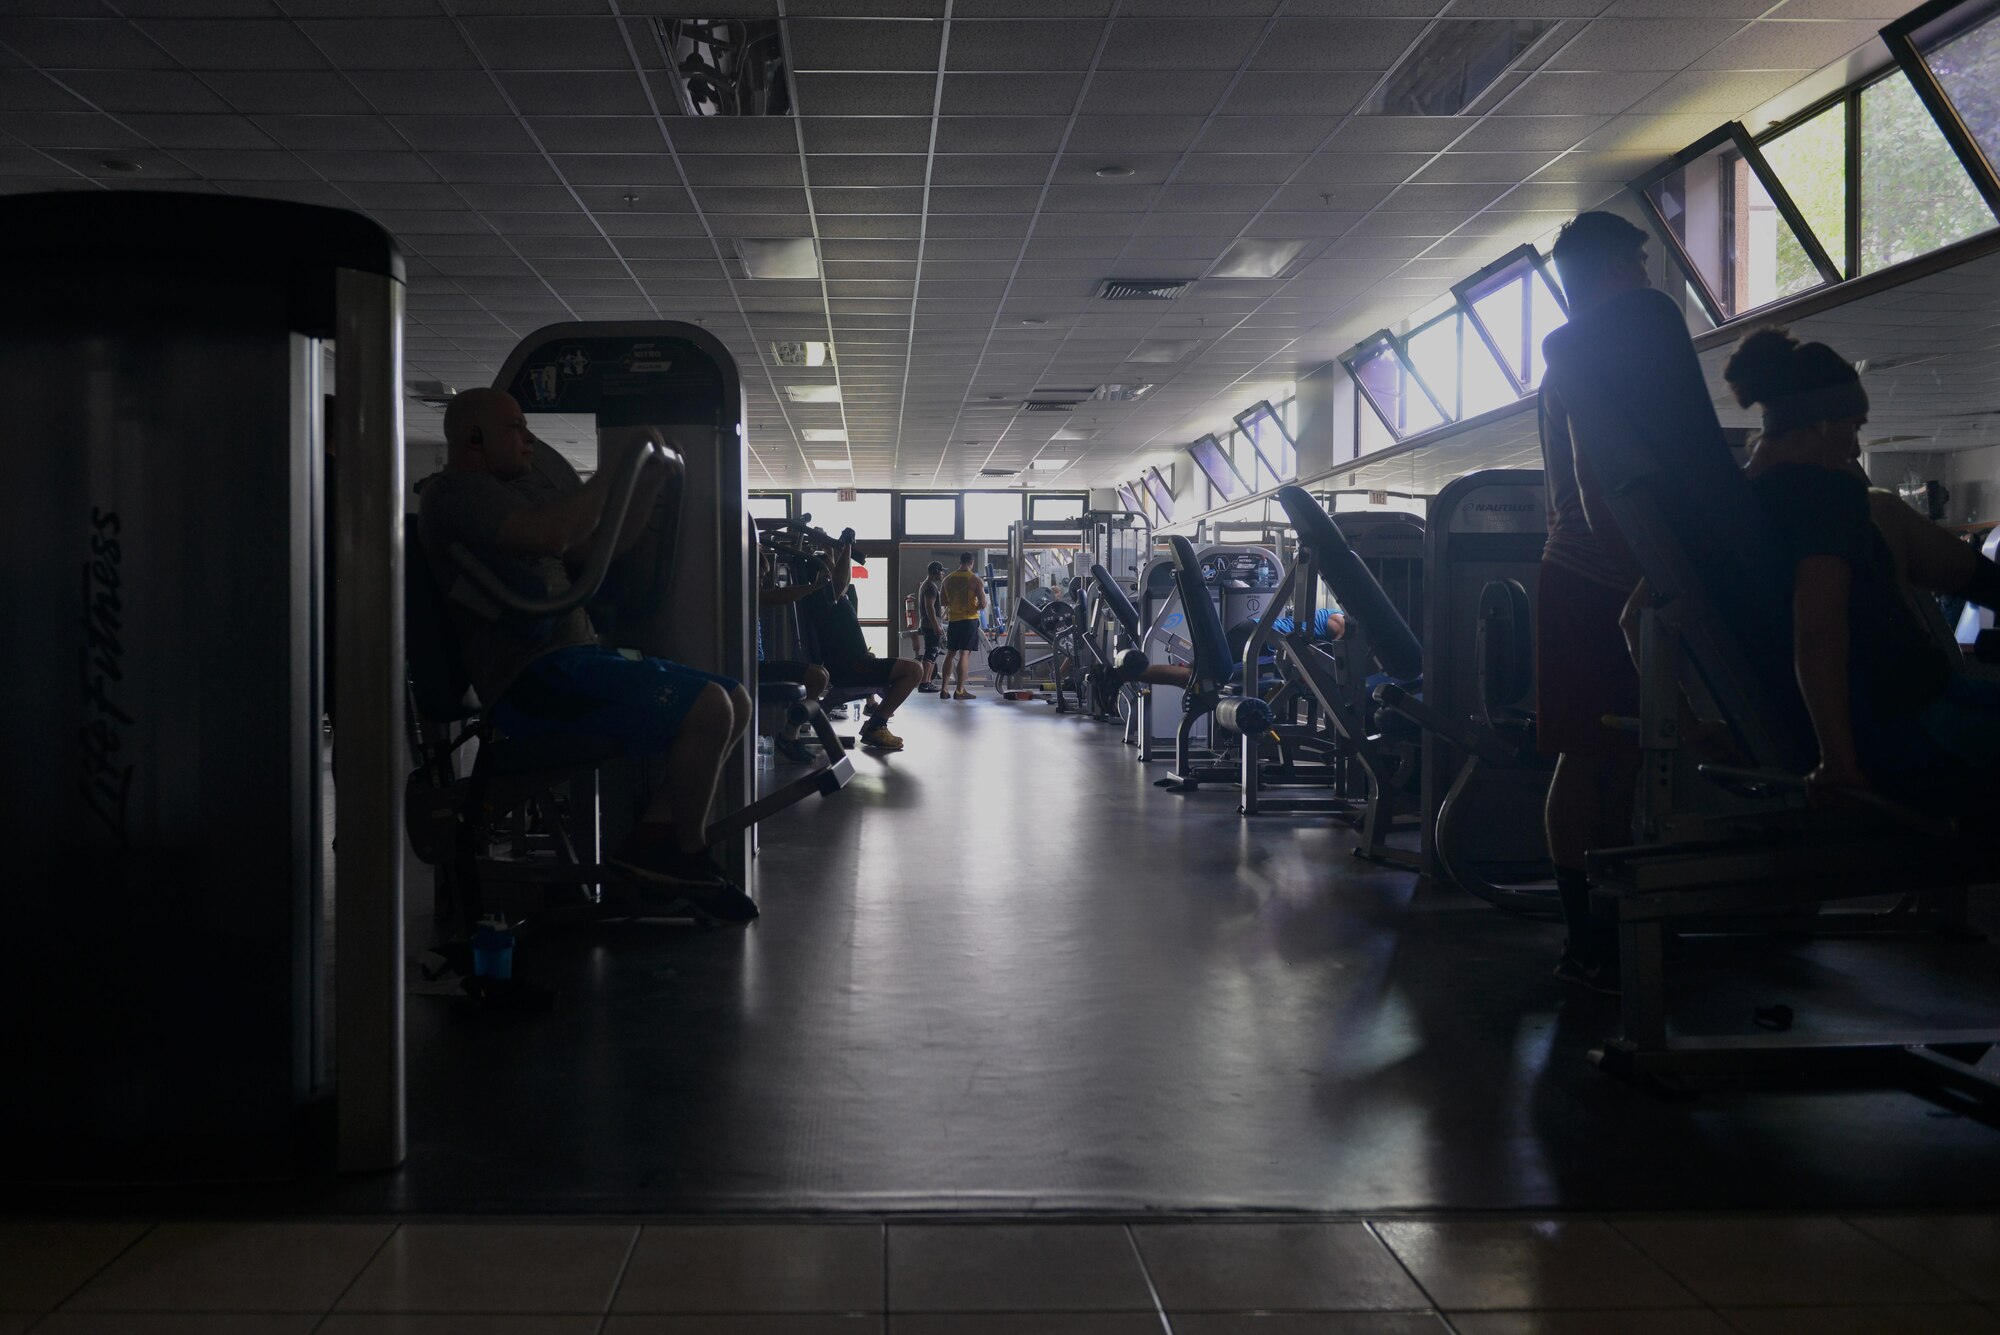 U.S. Air Force Airmen work out with limited electricity at the fitness center at Incirlik Air Base, Turkey, July 21, 2016. Due to a temporary loss of commercial power, some facilities had to continue operations, including the base's fitness center until power was completely restored. (U.S. Air Force photo by Senior Airman John Nieves Camacho) 